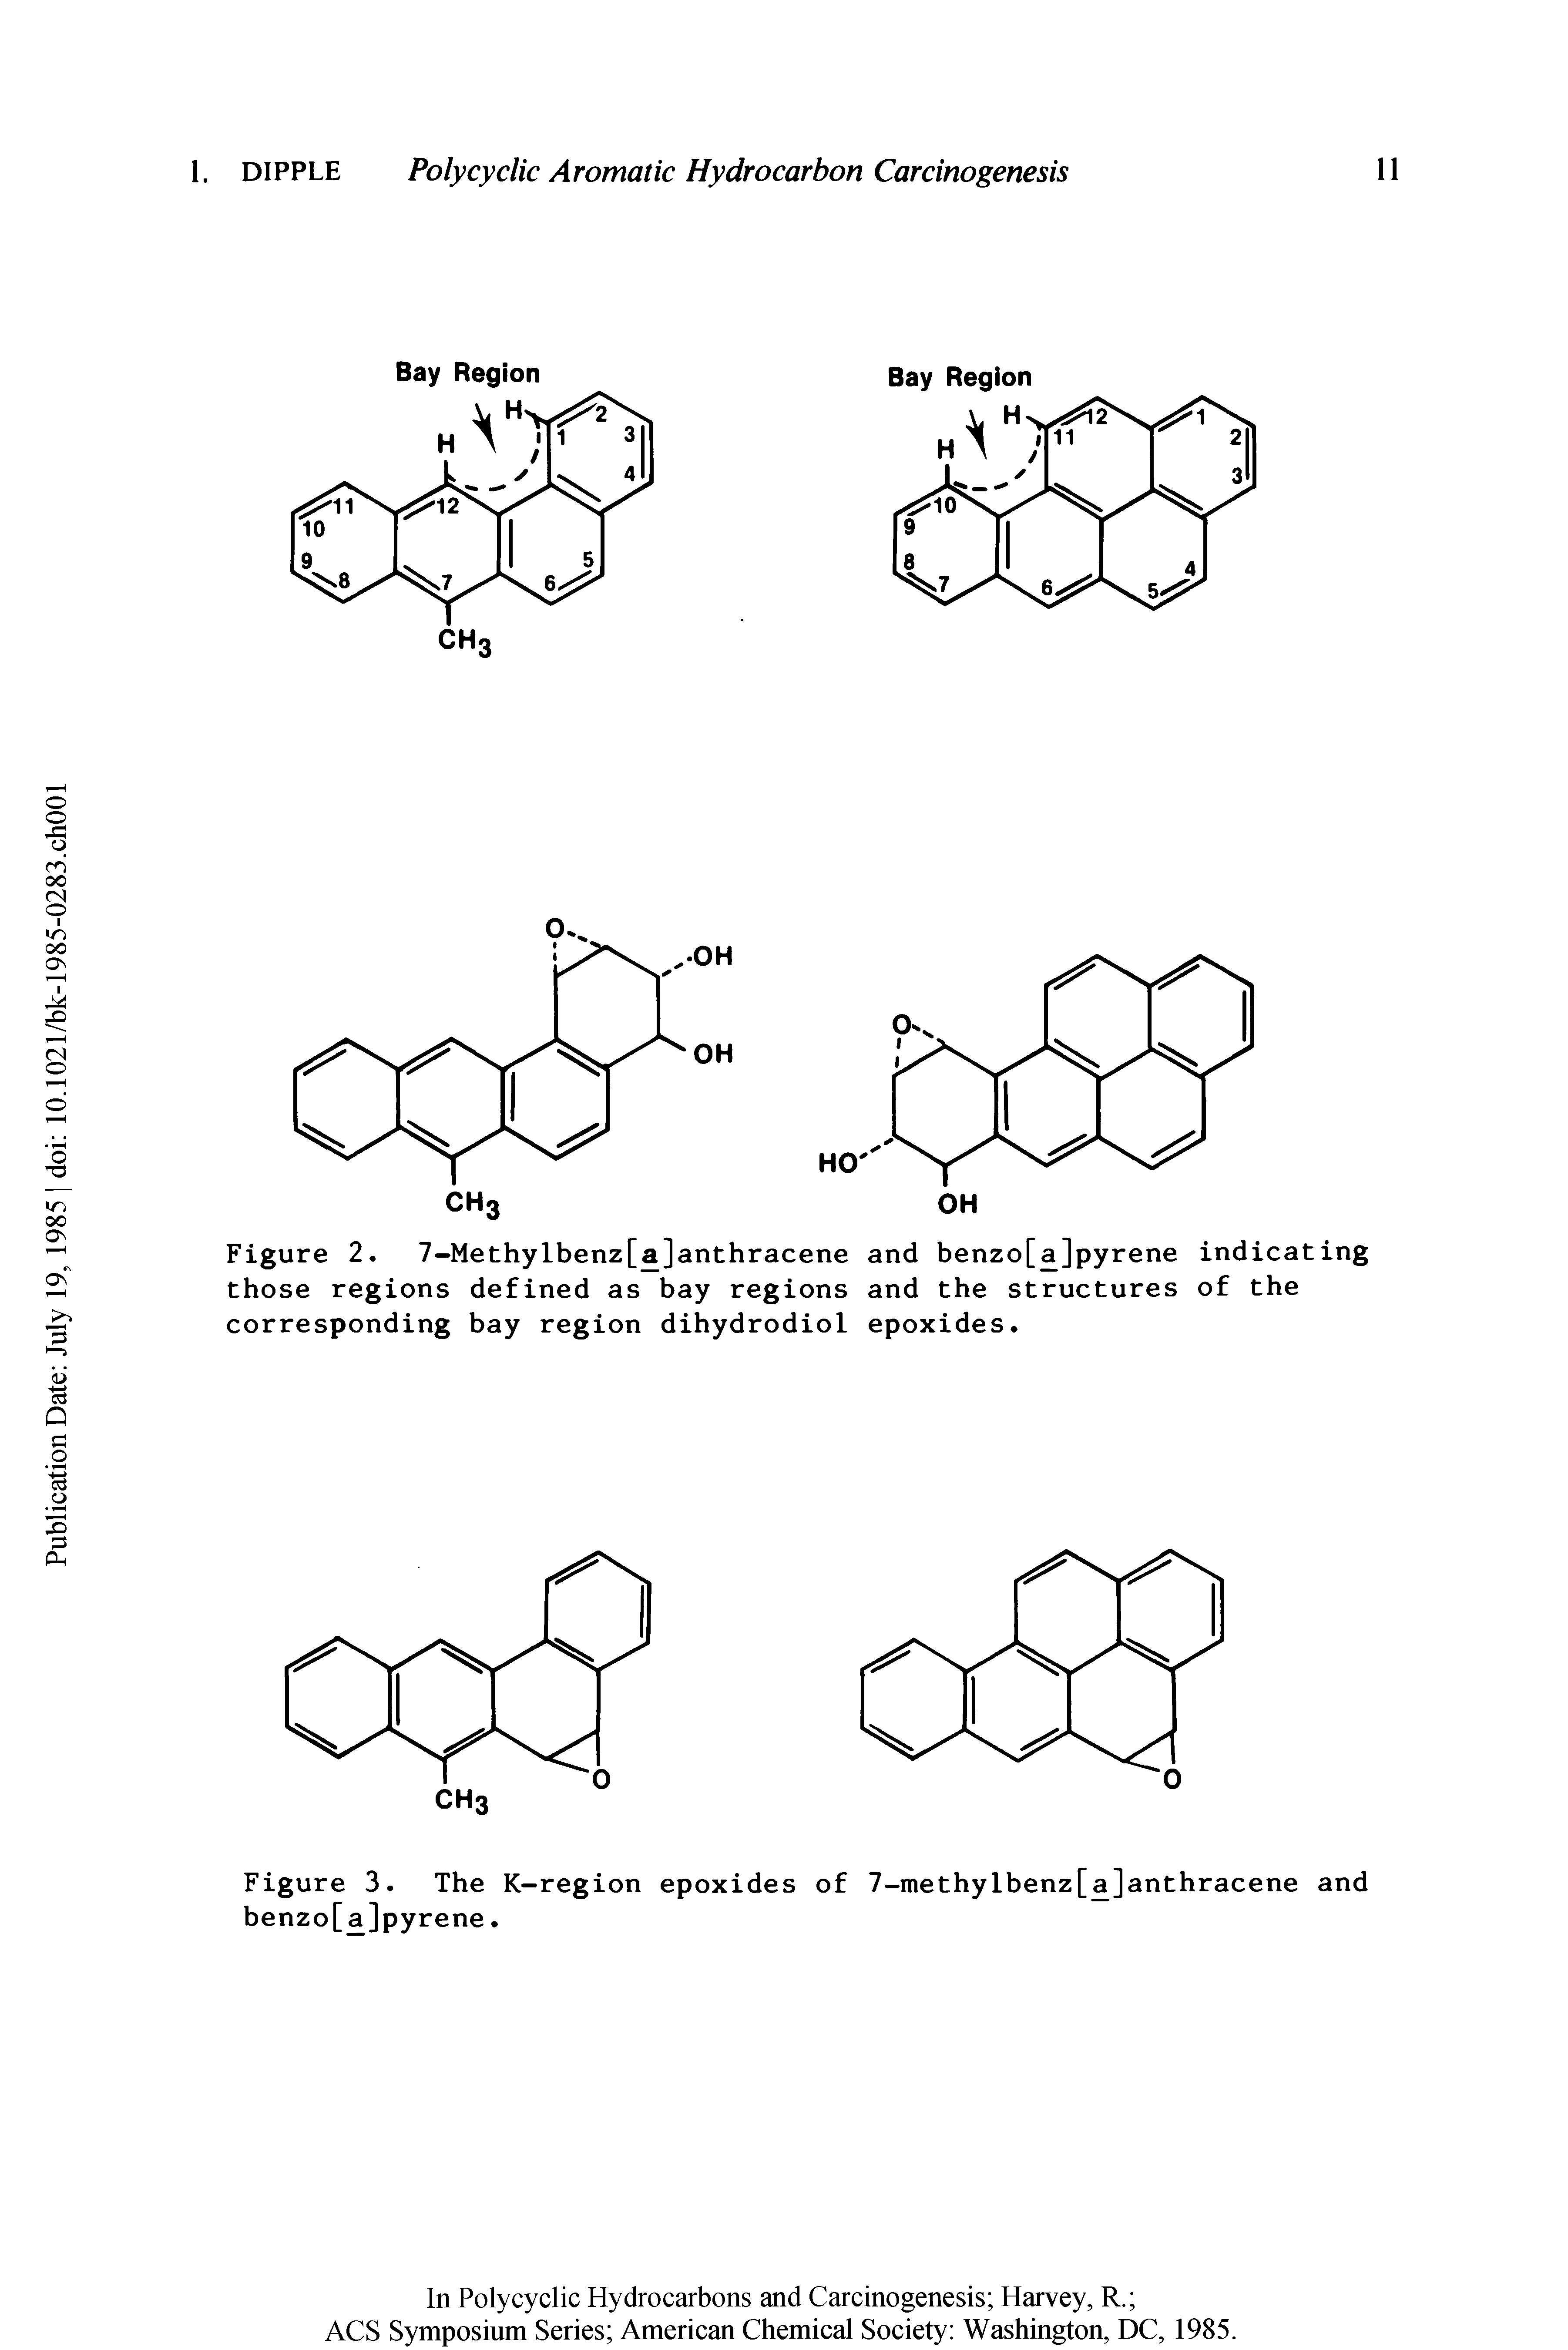 Figure 3. The K-region epoxides of 7-methylbenz[a]anthracene and benzo[a]pyrene.